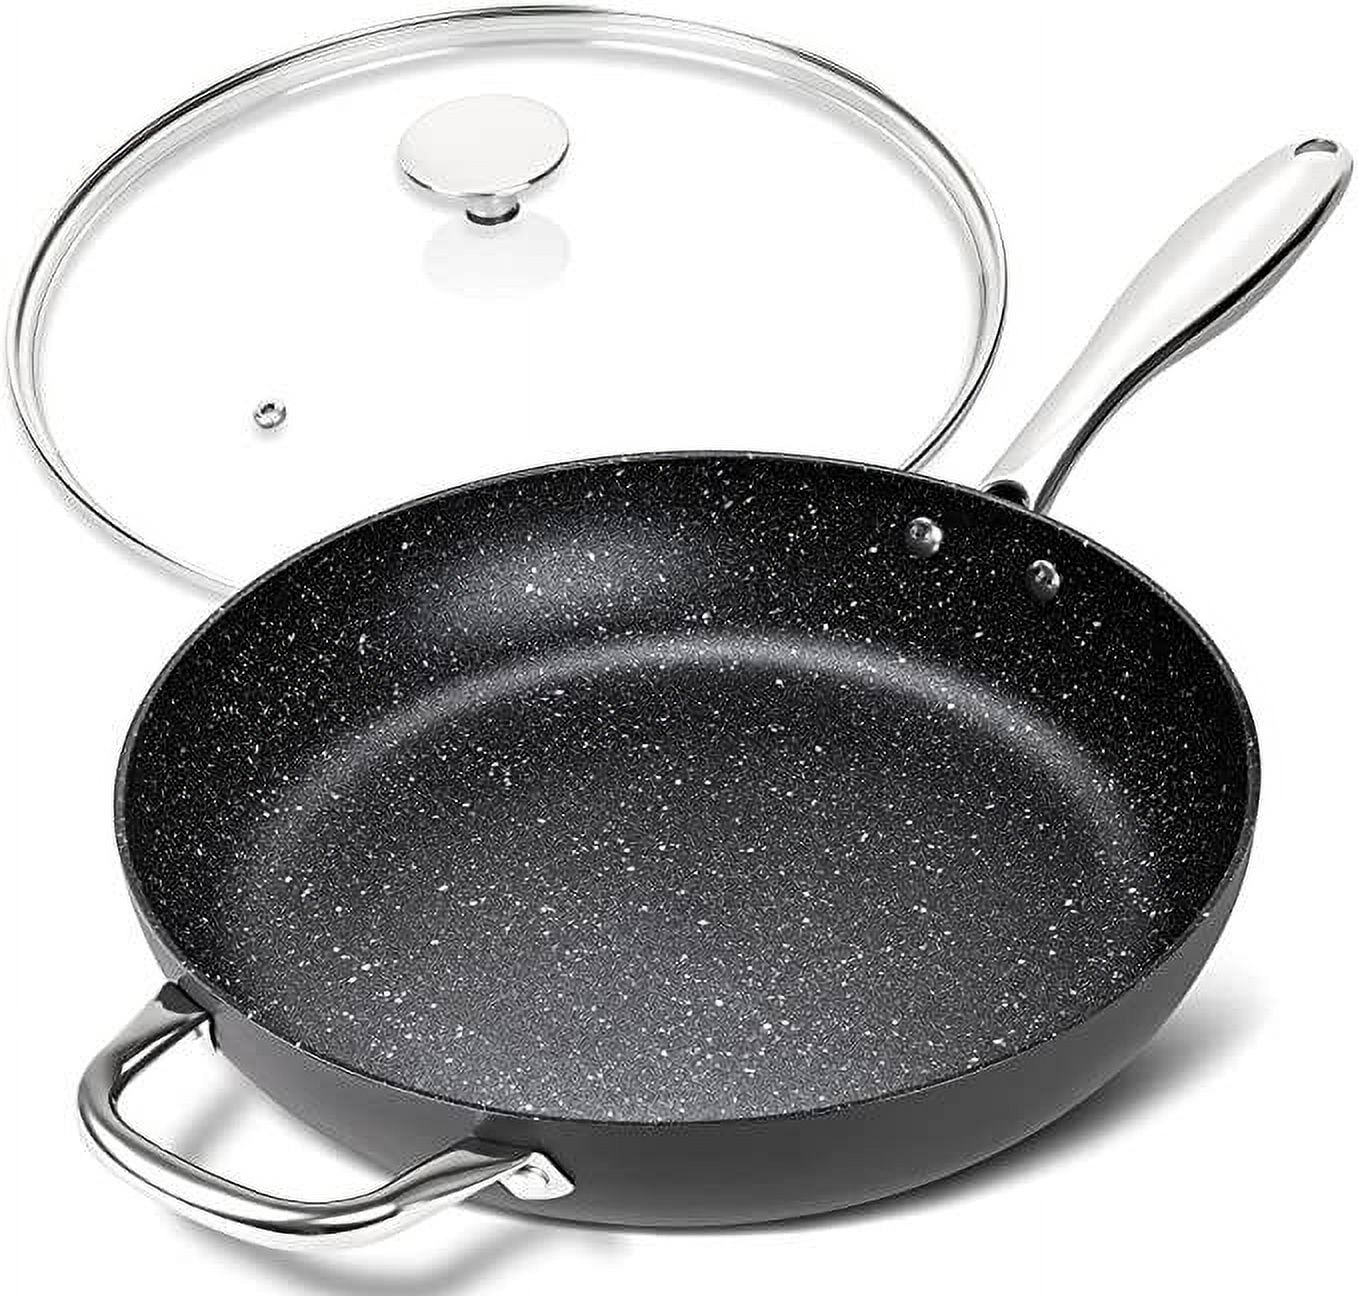 Non-Stick 12-Inch Frying Pan with Lid